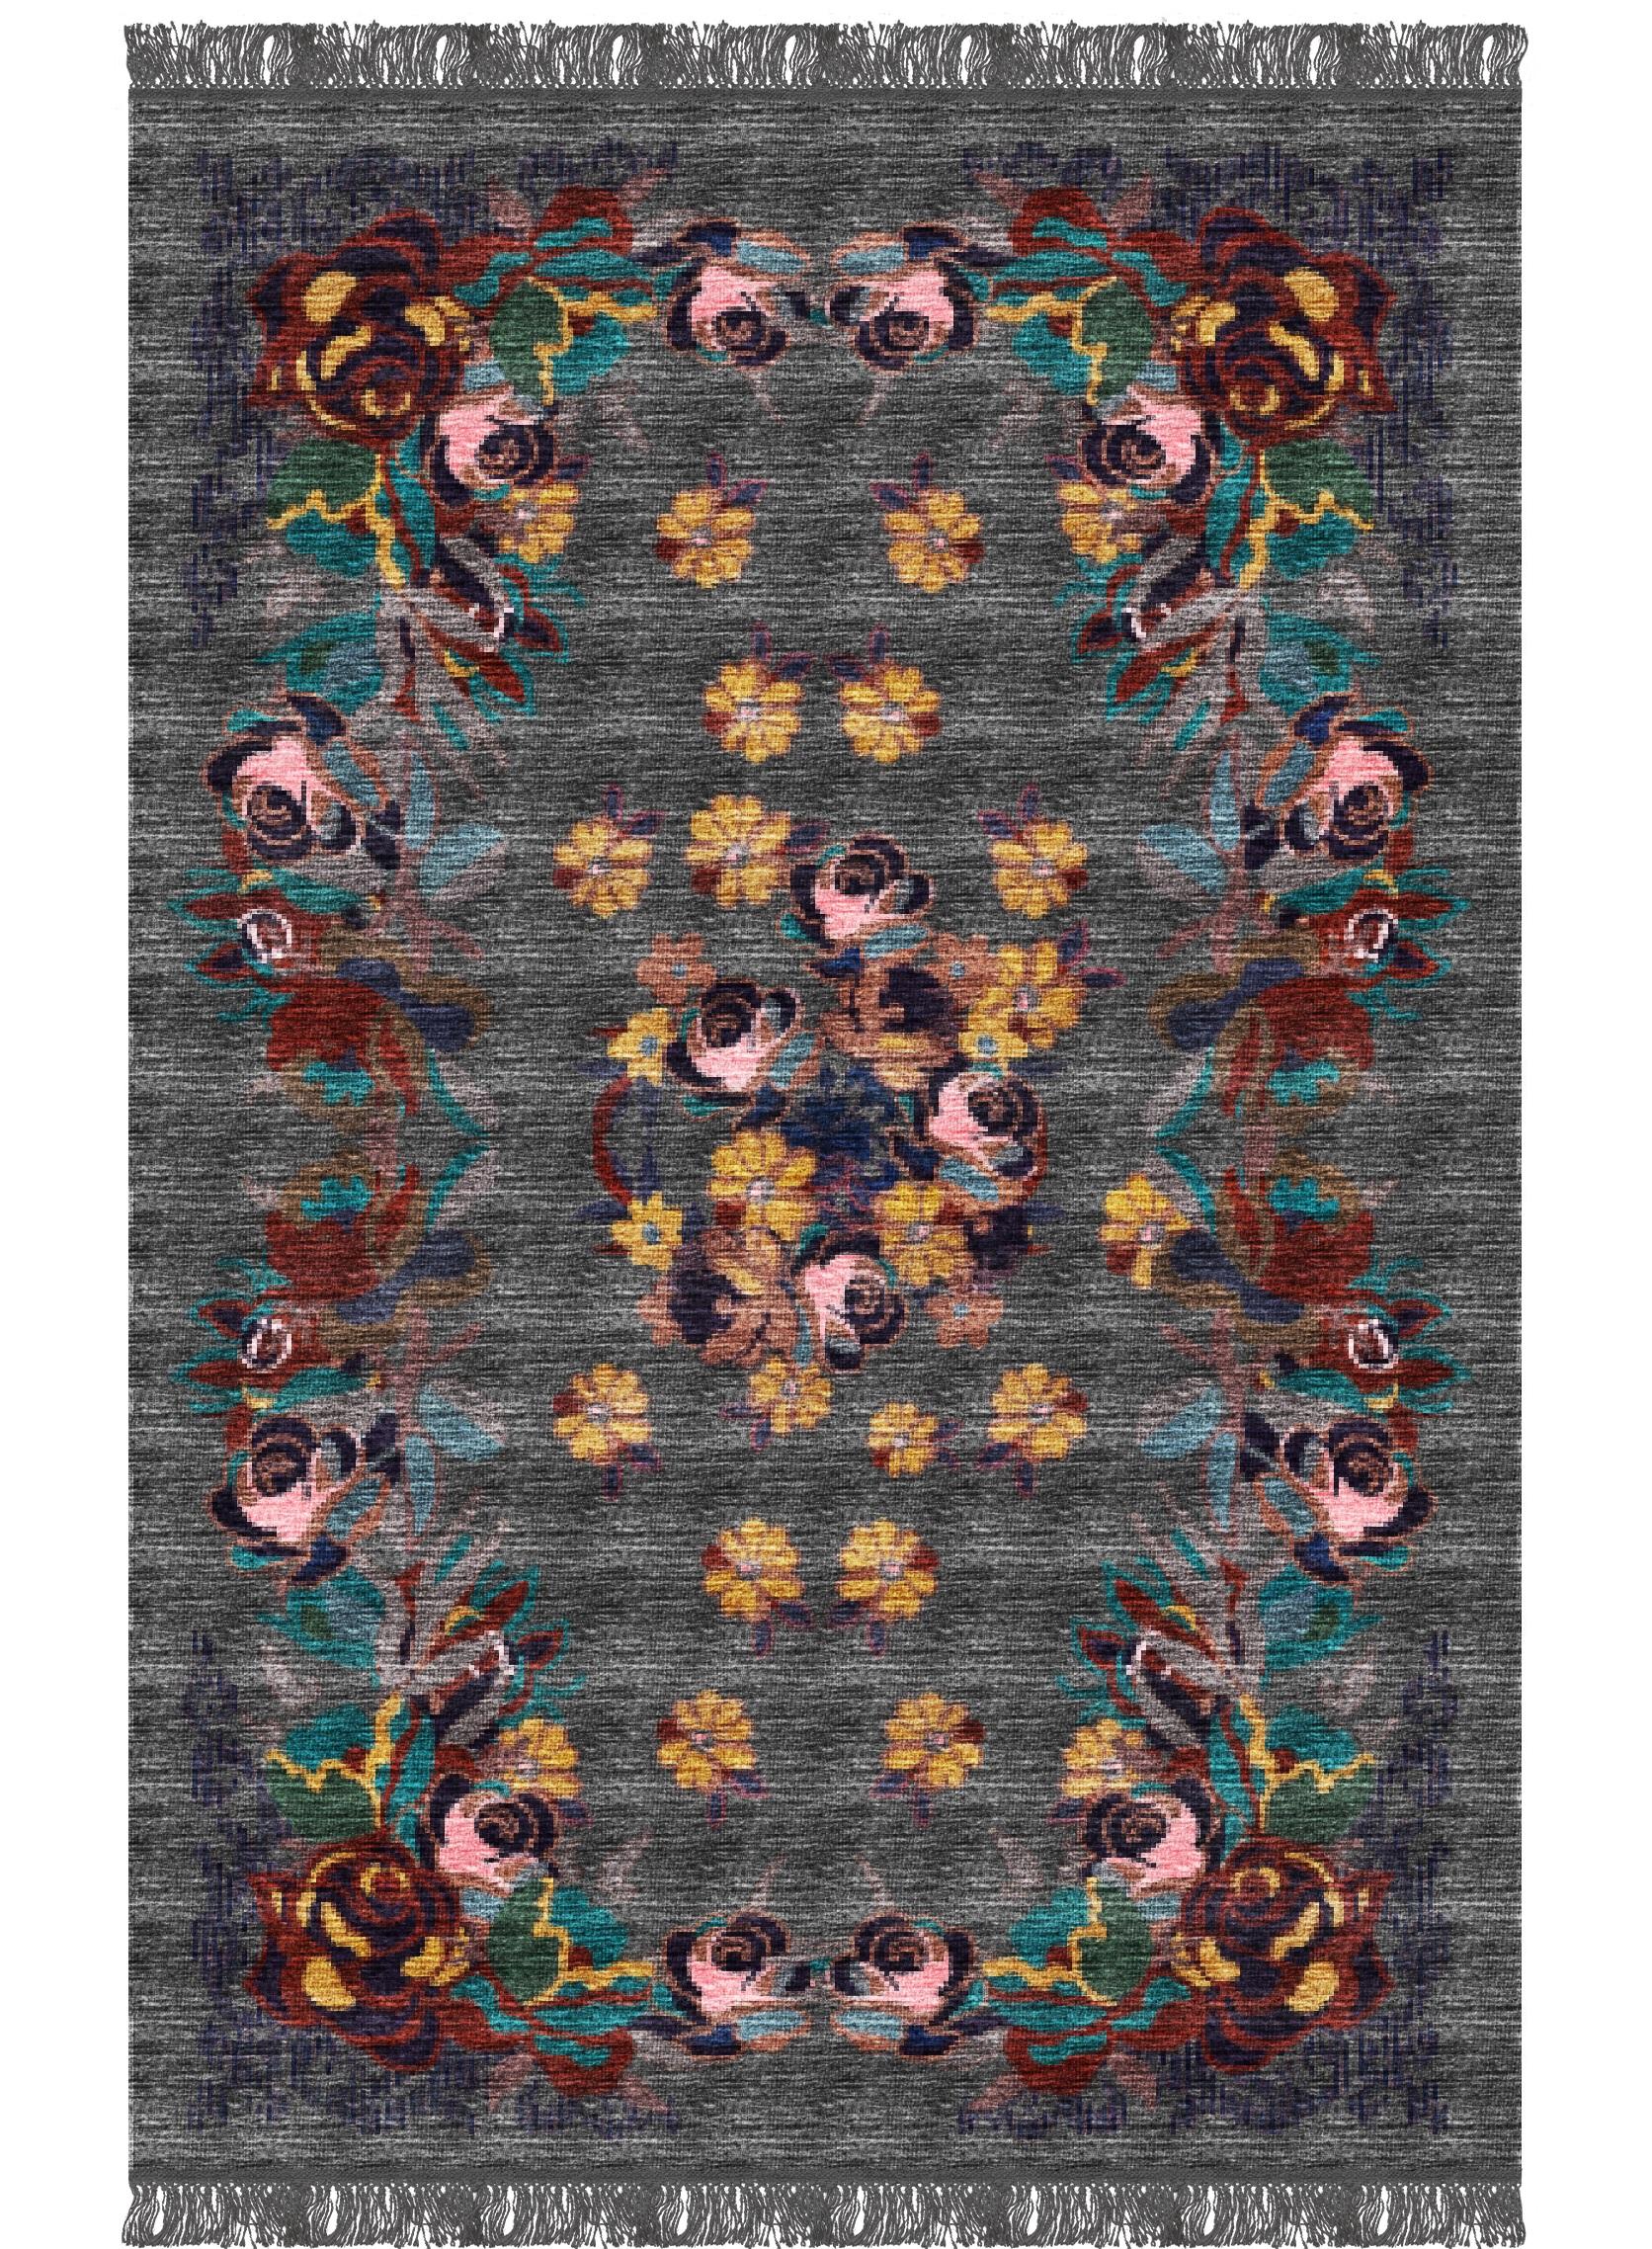 Fiori rug I by Giulio Brambilla
Dimensions: D 300 x W 200 x H 0.5 cm
Materials: NZ wool, melange yarn

A captivating composition inspired by Georgian art, this exquisite rug is a contemporary design by artist and architect Giulio Brambilla.